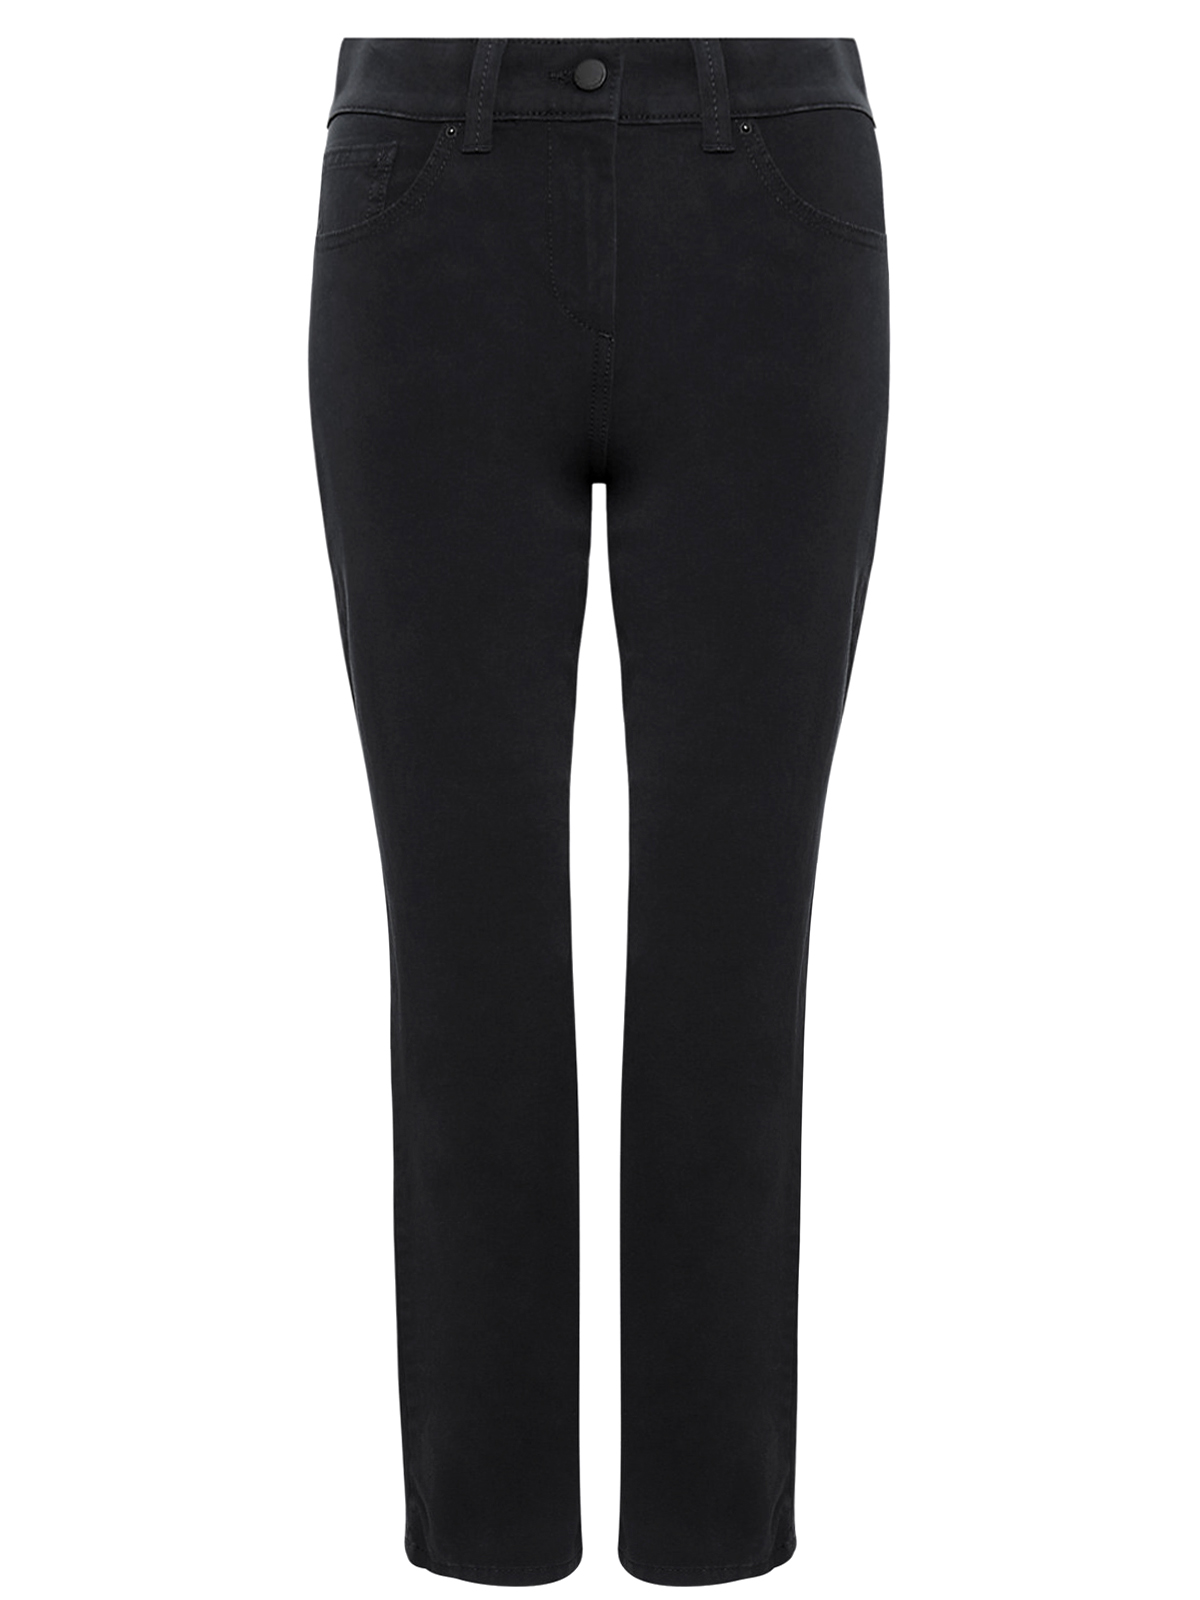 Marks and Spencer - - M&5 BLACK Cotton Rich 2-Way Stretch Straight Leg ...